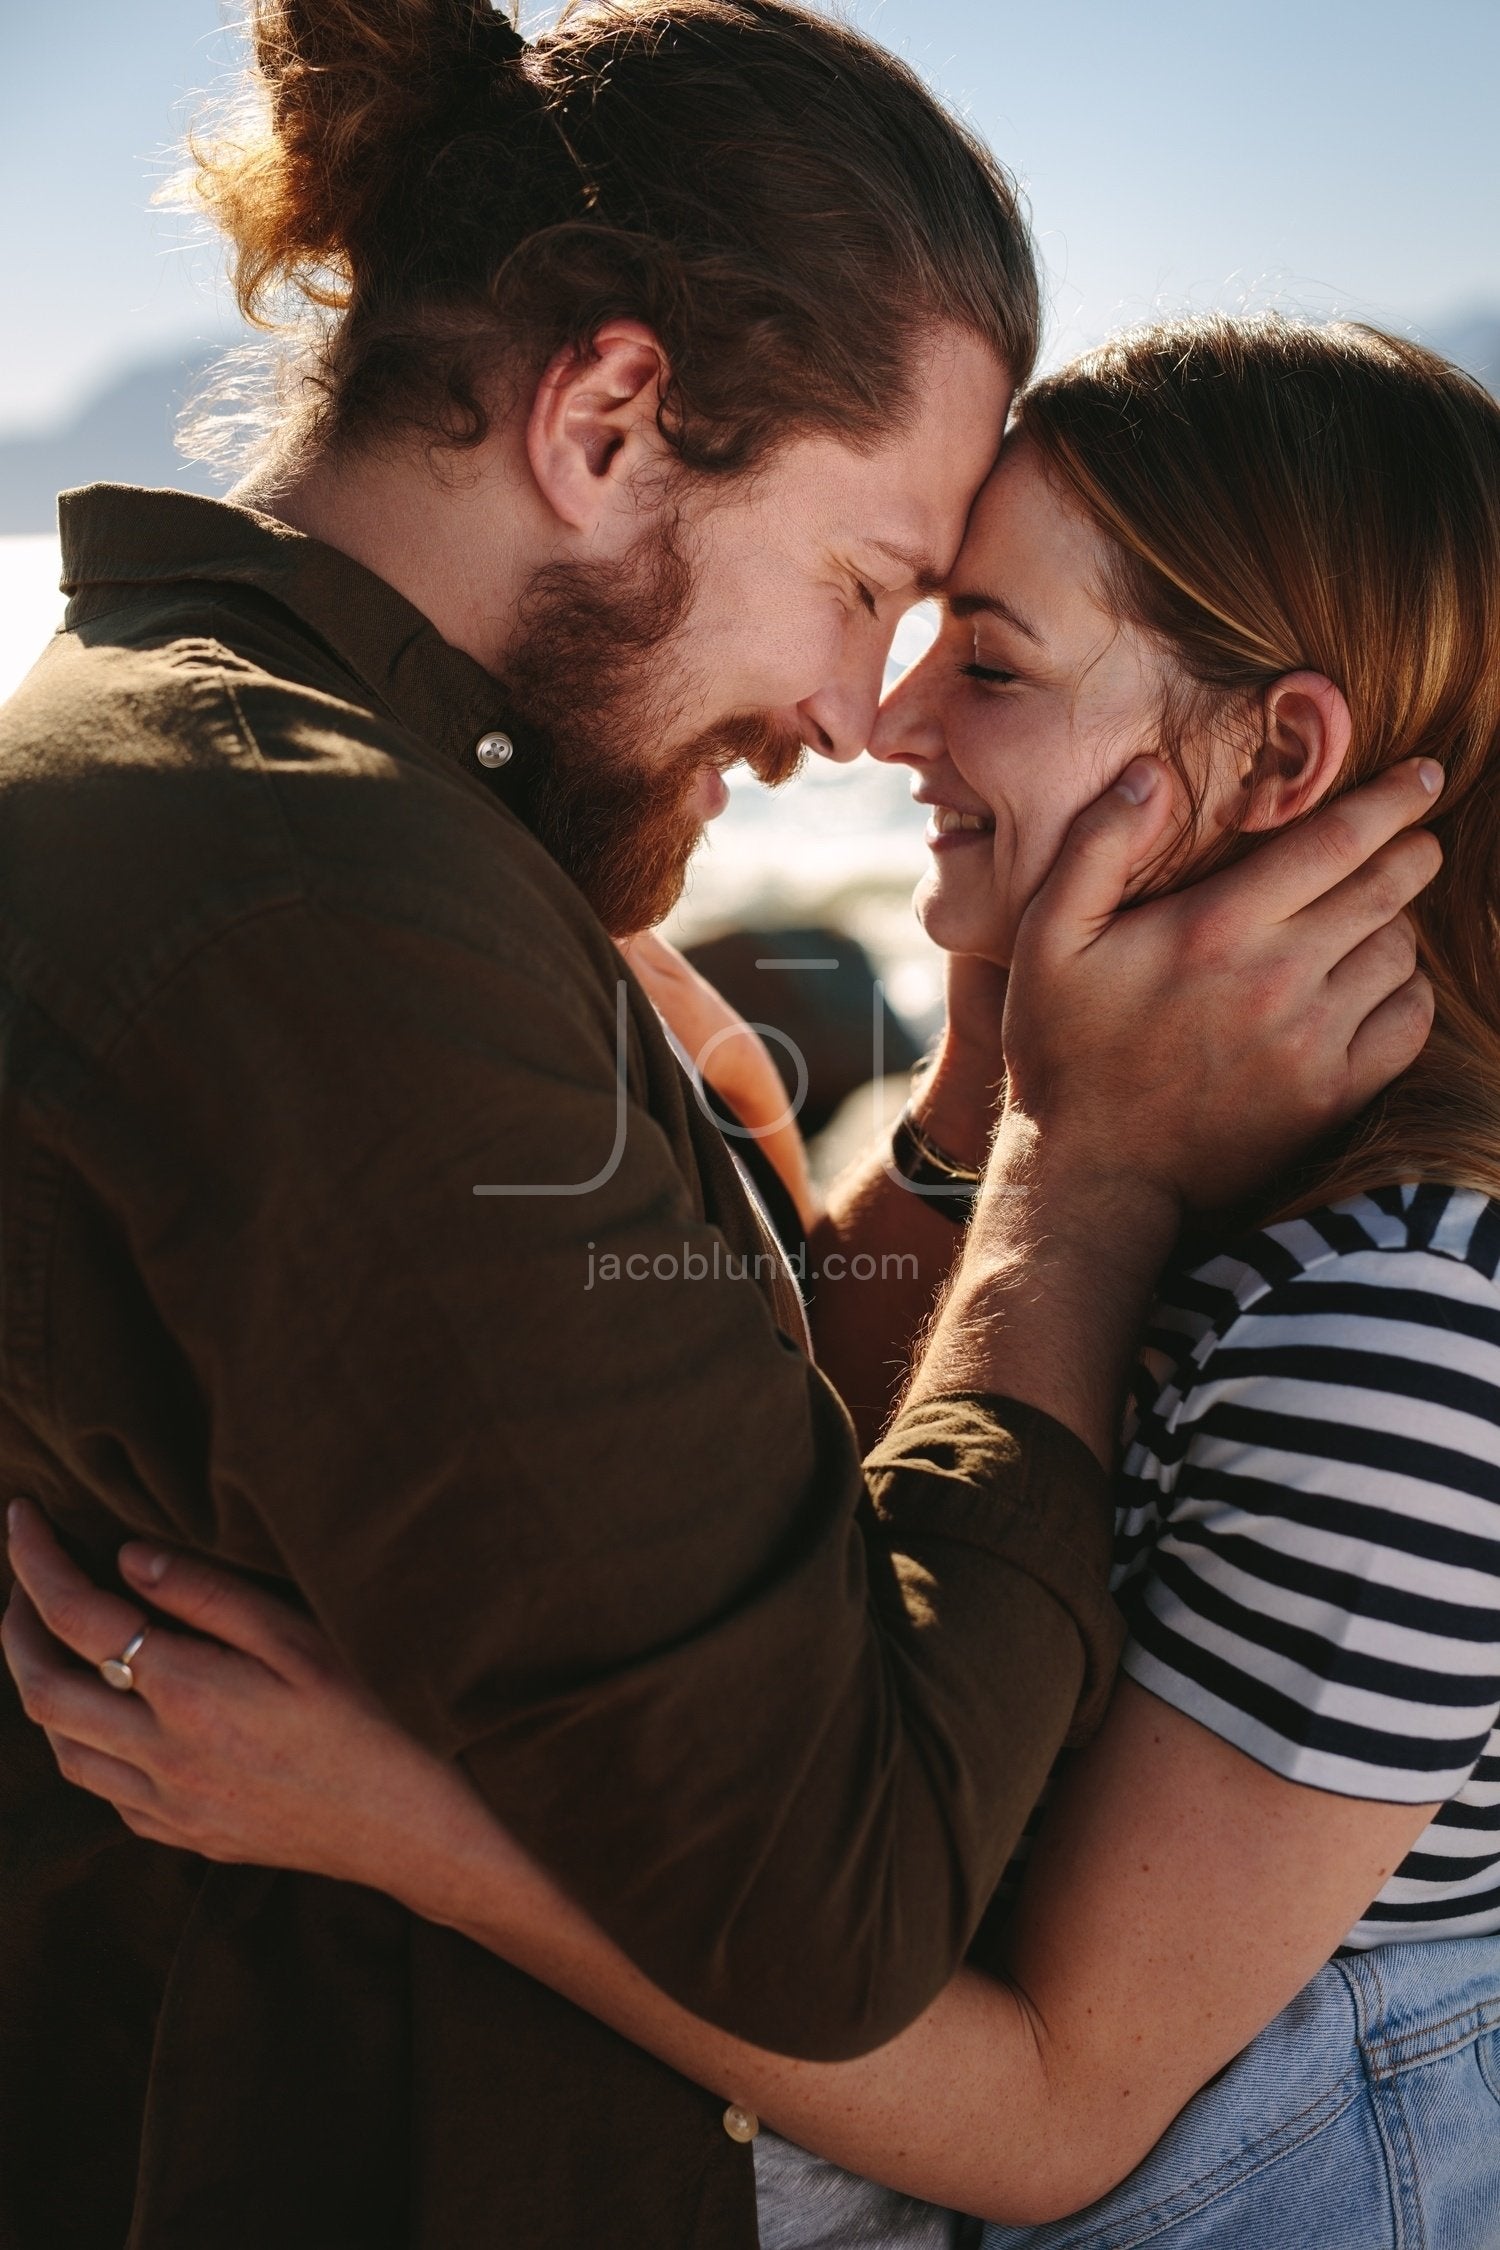 Loving couple caught in romantic moment – Jacob Lund Photography